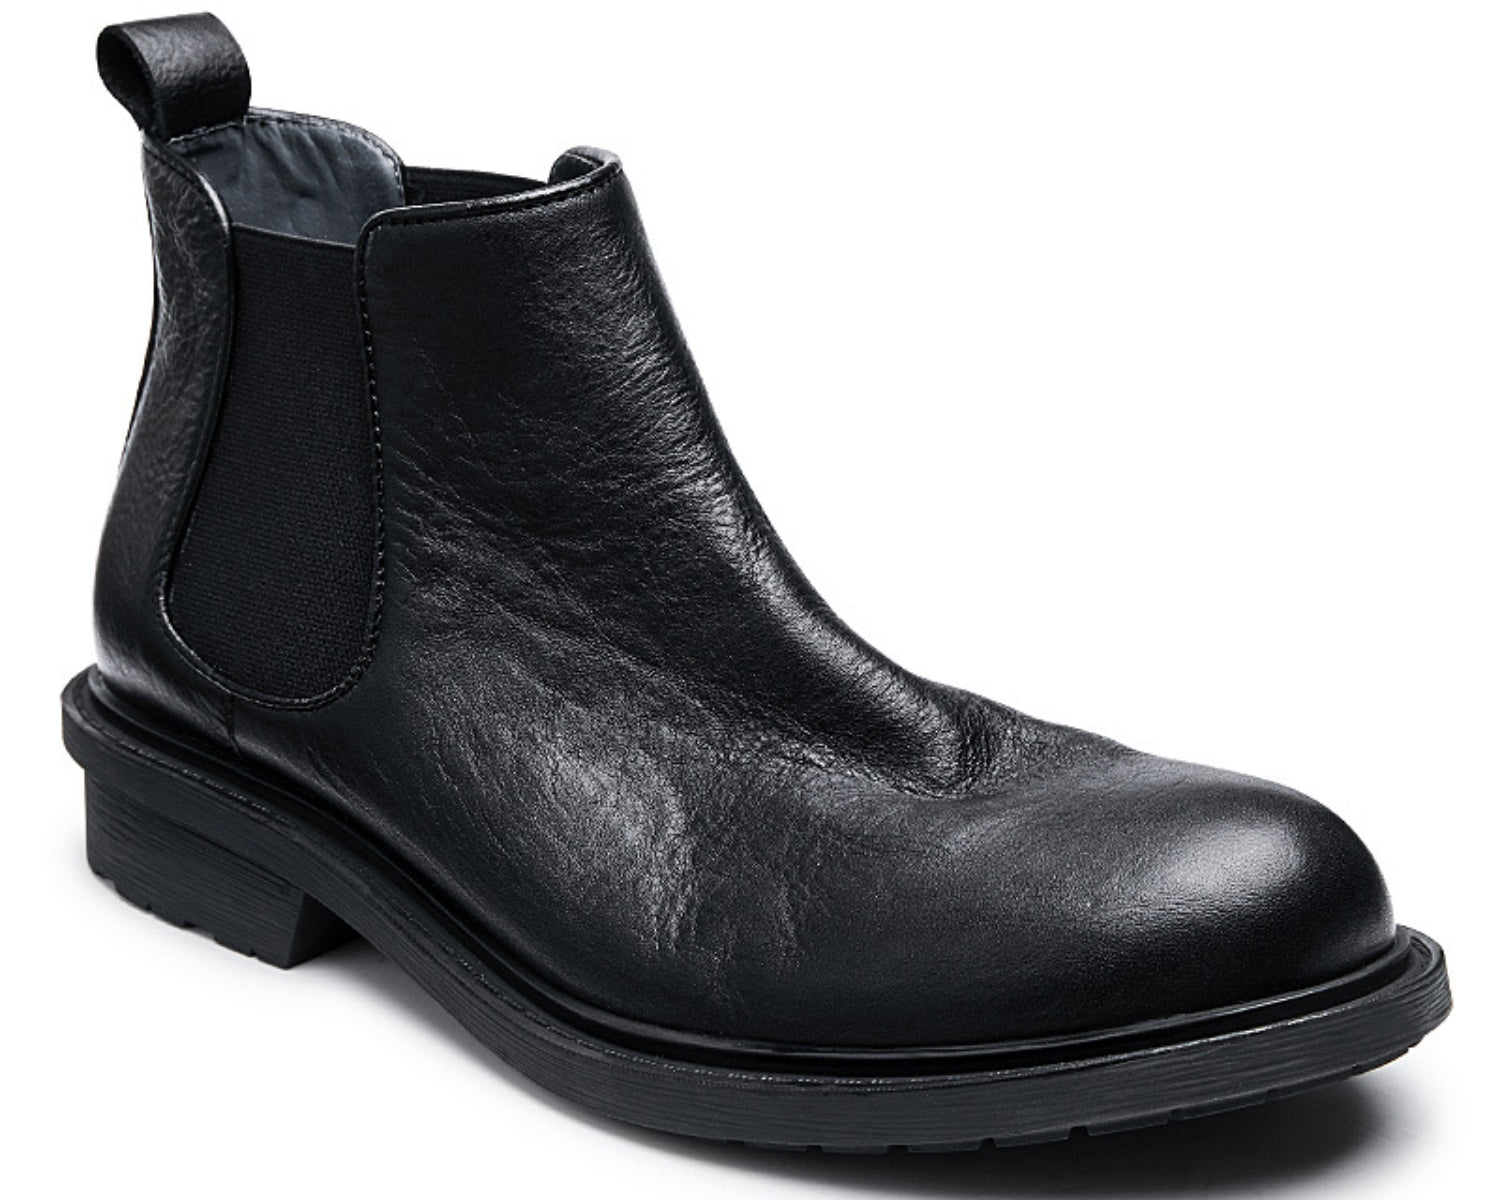 Men's classic Chelsea boots with rubber outsole in various styles including manner, old, and skin boots3